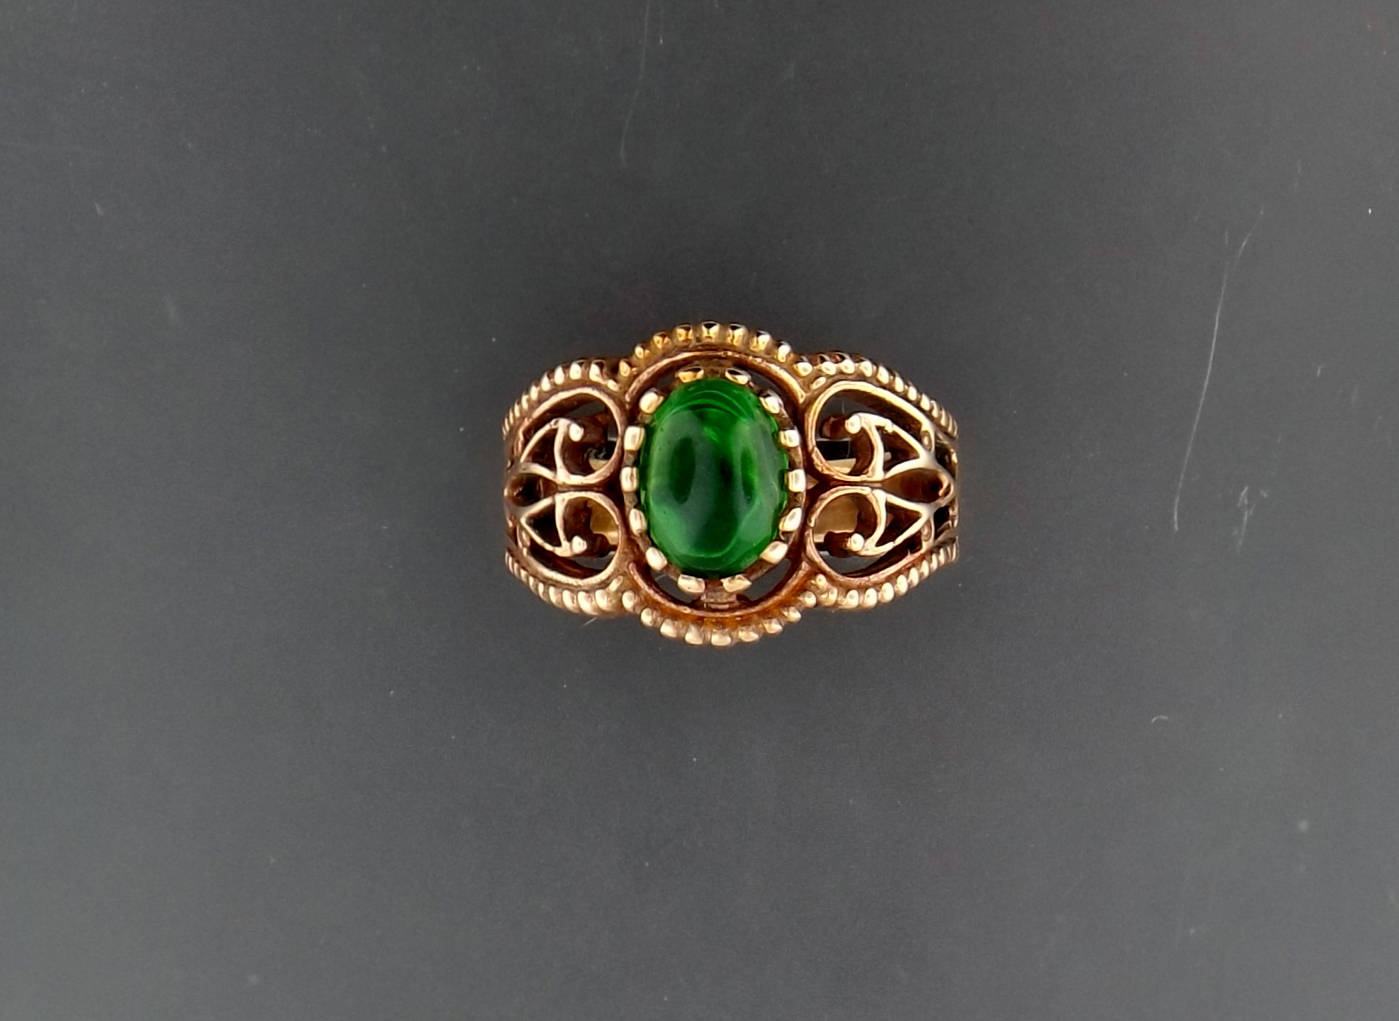 Vintage Style Filigree Ring with Gemstone in Antique Bronze, Gothic Style Ring, Victorian Style Ring, 1950 Style Ring, Antique Bronze Birthstone Ring, Bronze 1950s Ring, Mid Century Bronze Ring, Vintage Bronze Gemstone Ring, Filigree Gemstone Ring